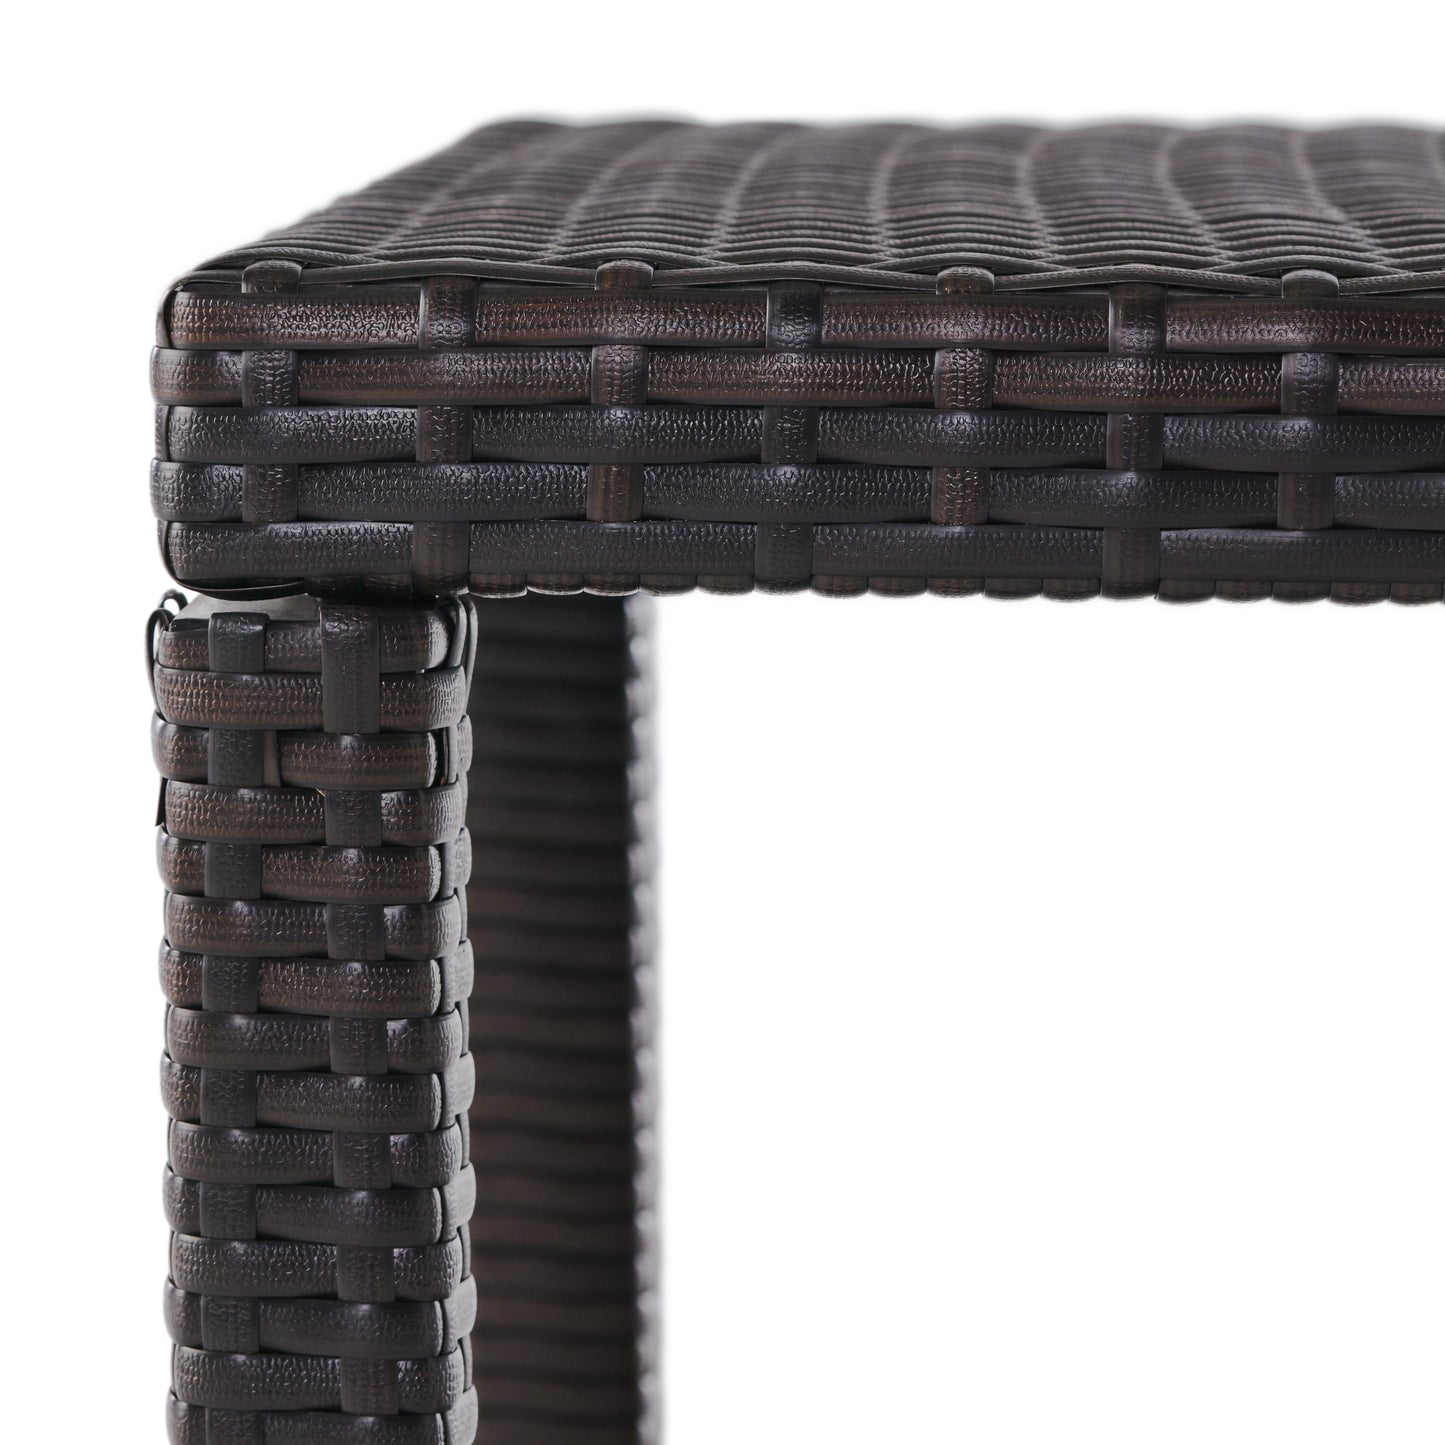 Palawan Outdoor Wicker Accent Table